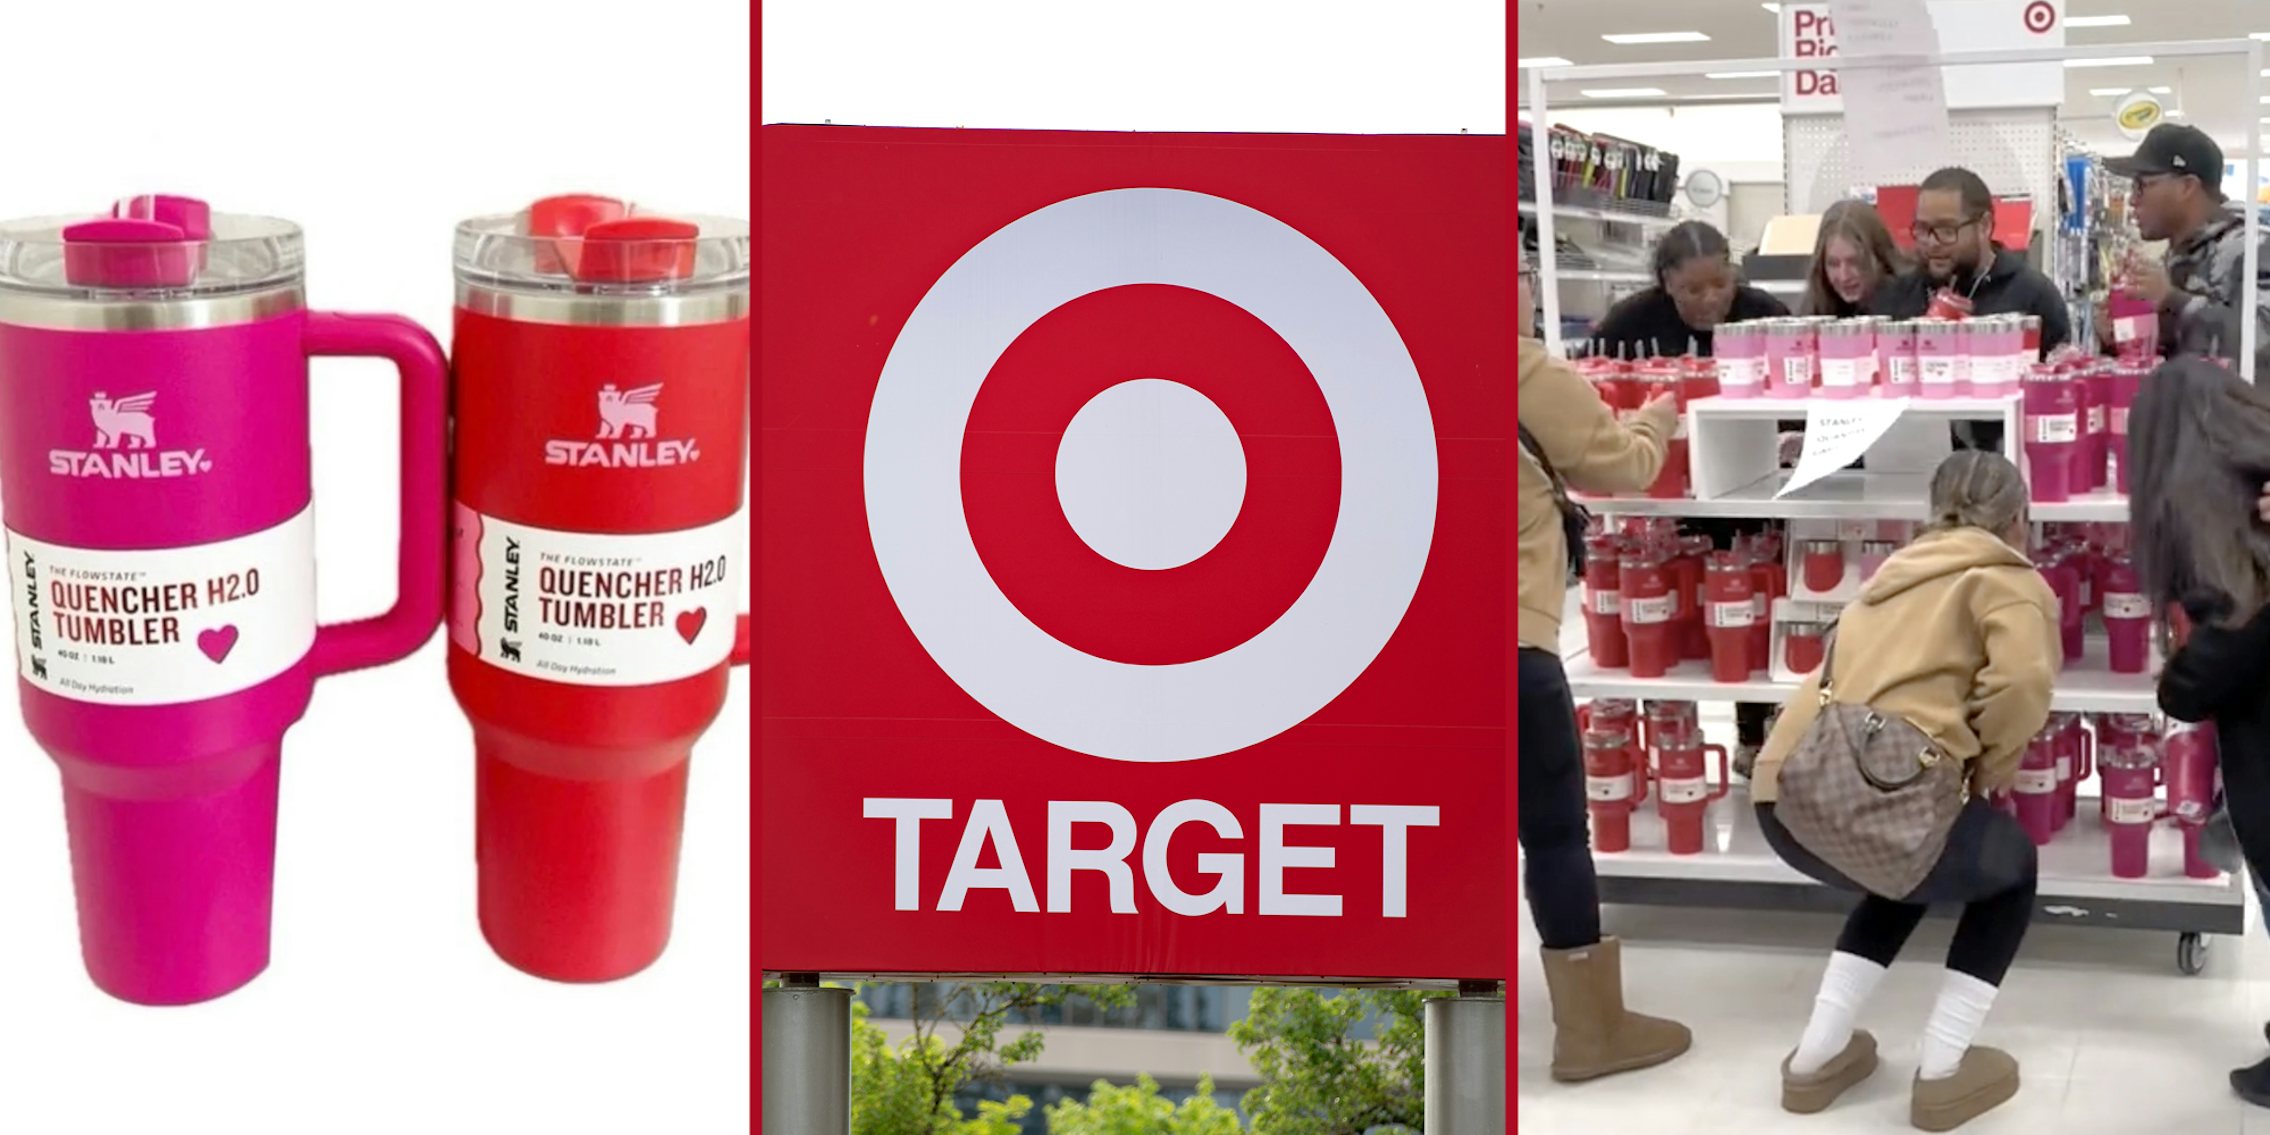 Target Customers Rush To Get New Valentine's Day Stanley Cup